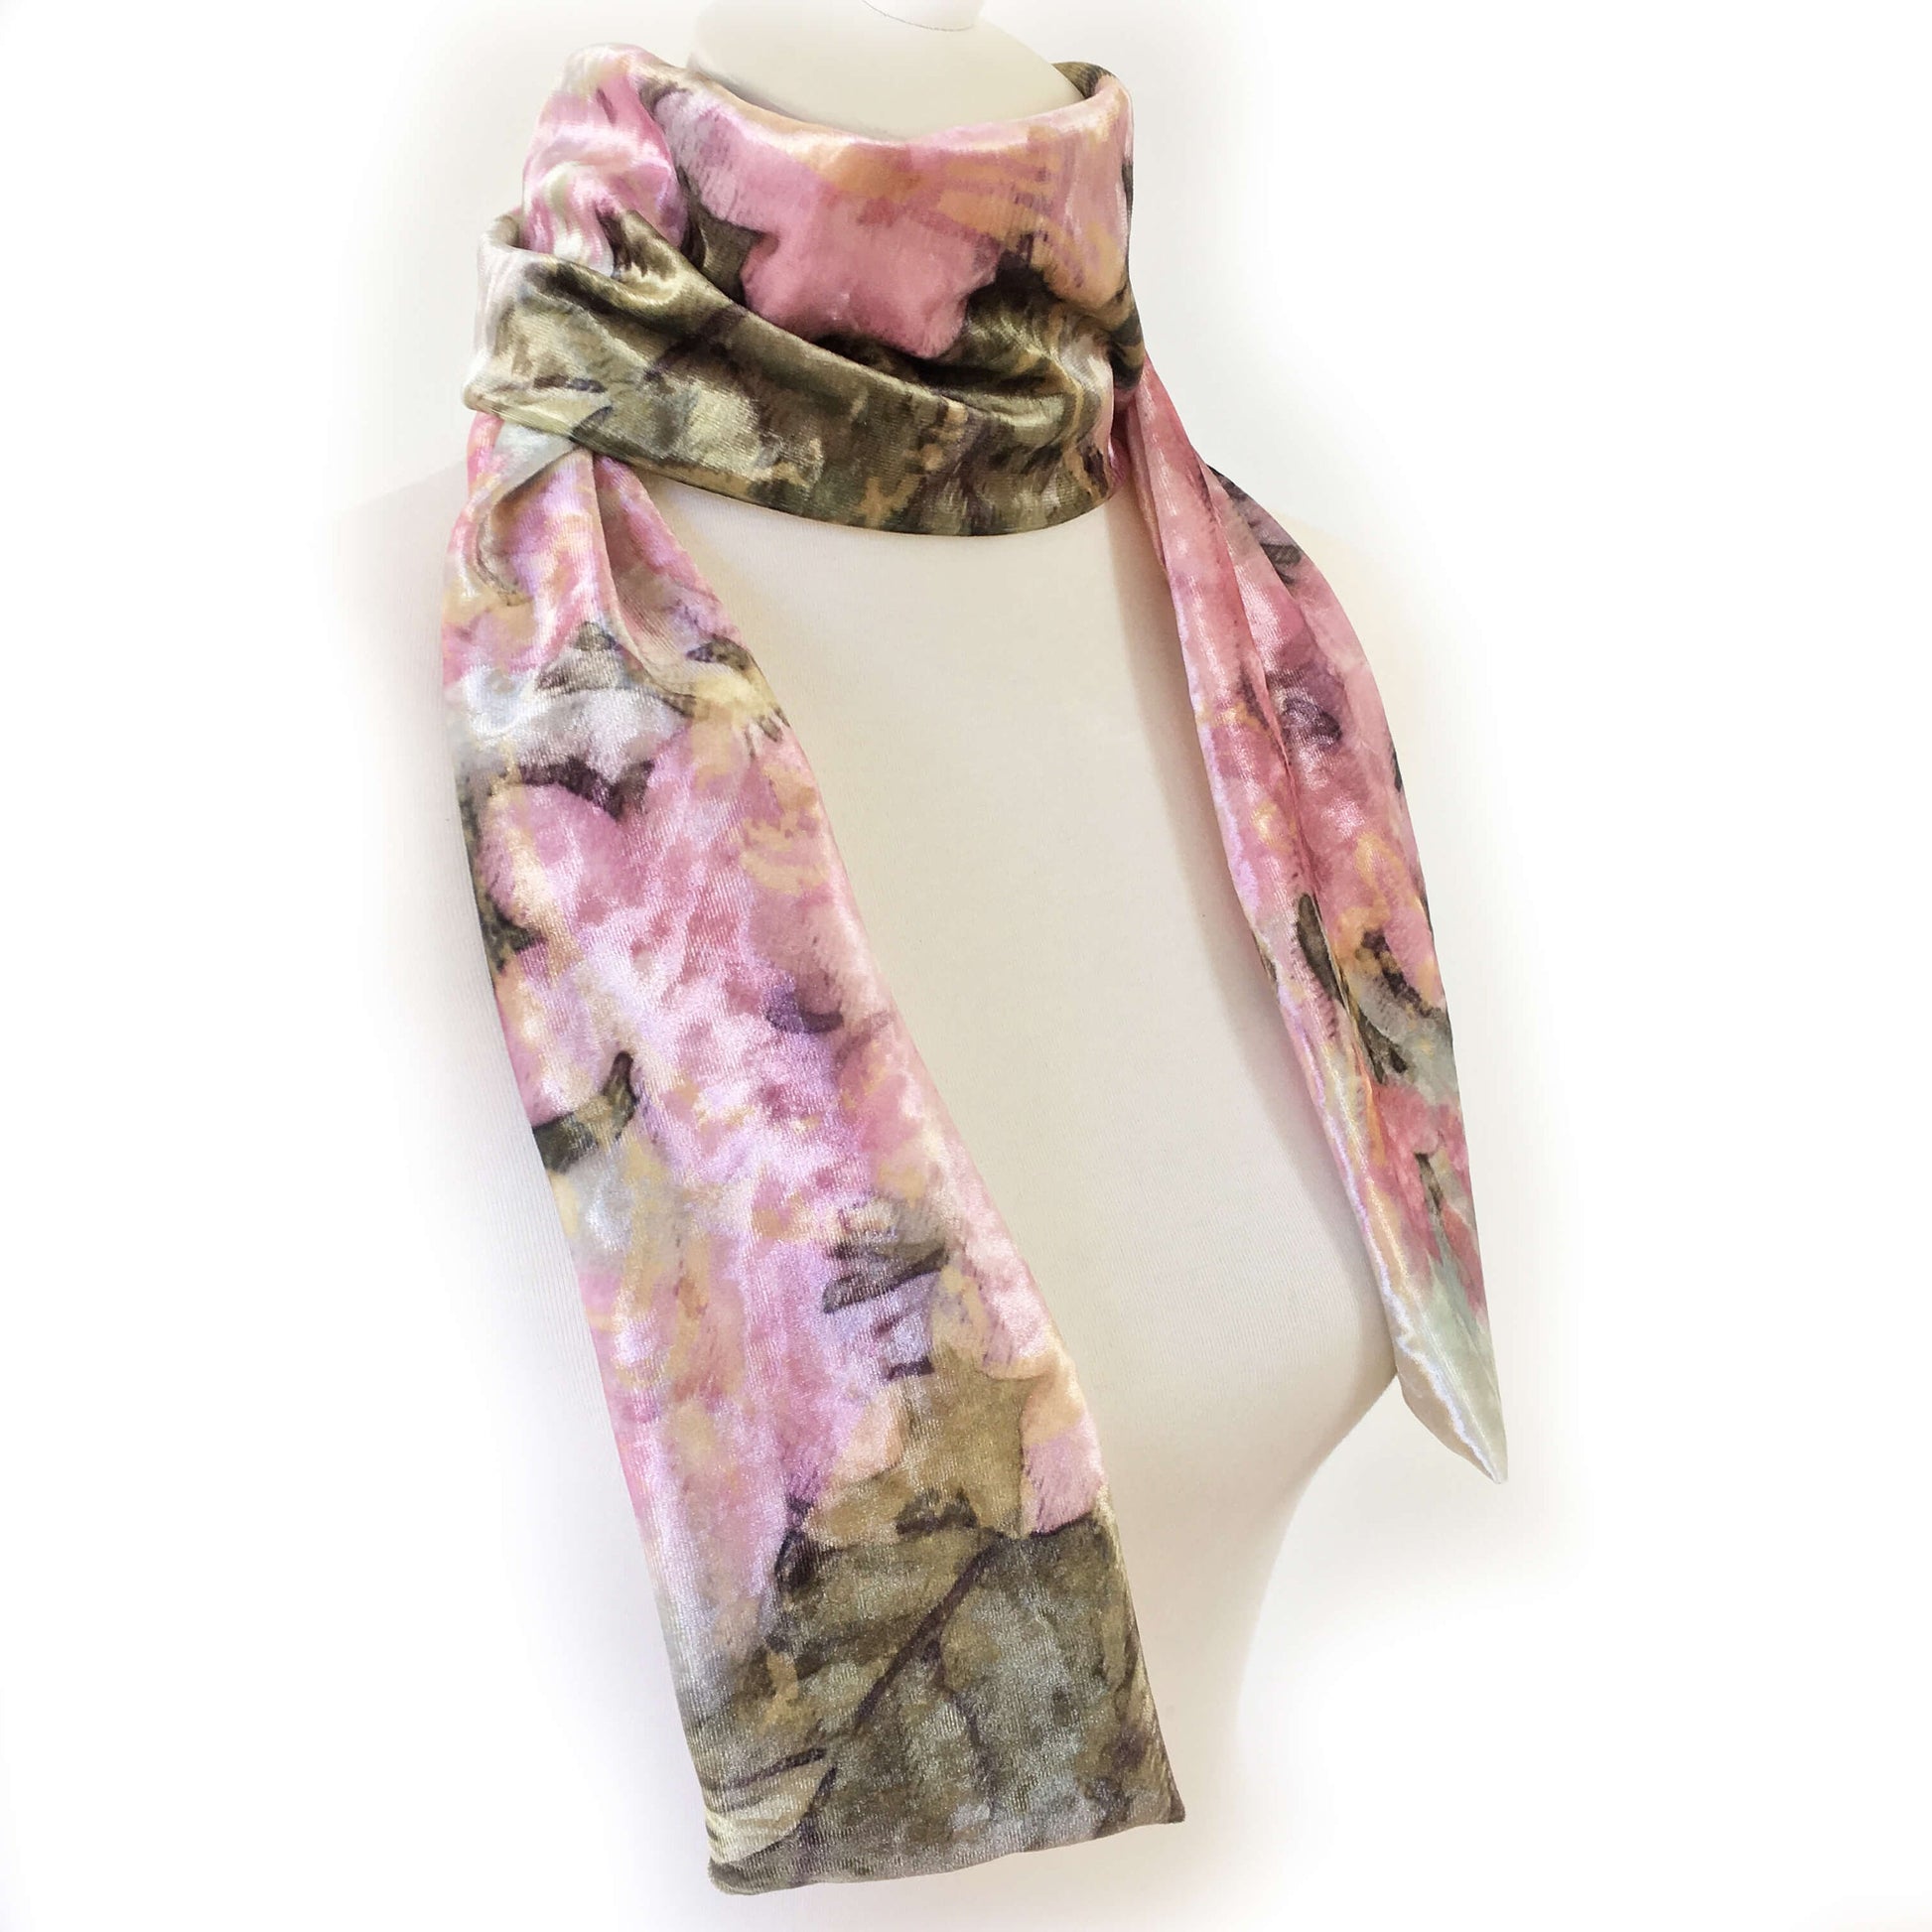 Pink Hydrangea Scarf, Velour Scarf, womans scarf, All season scarf, Artisan Scarf, Luxe, Soft, hand painted scarf, ladies scarf